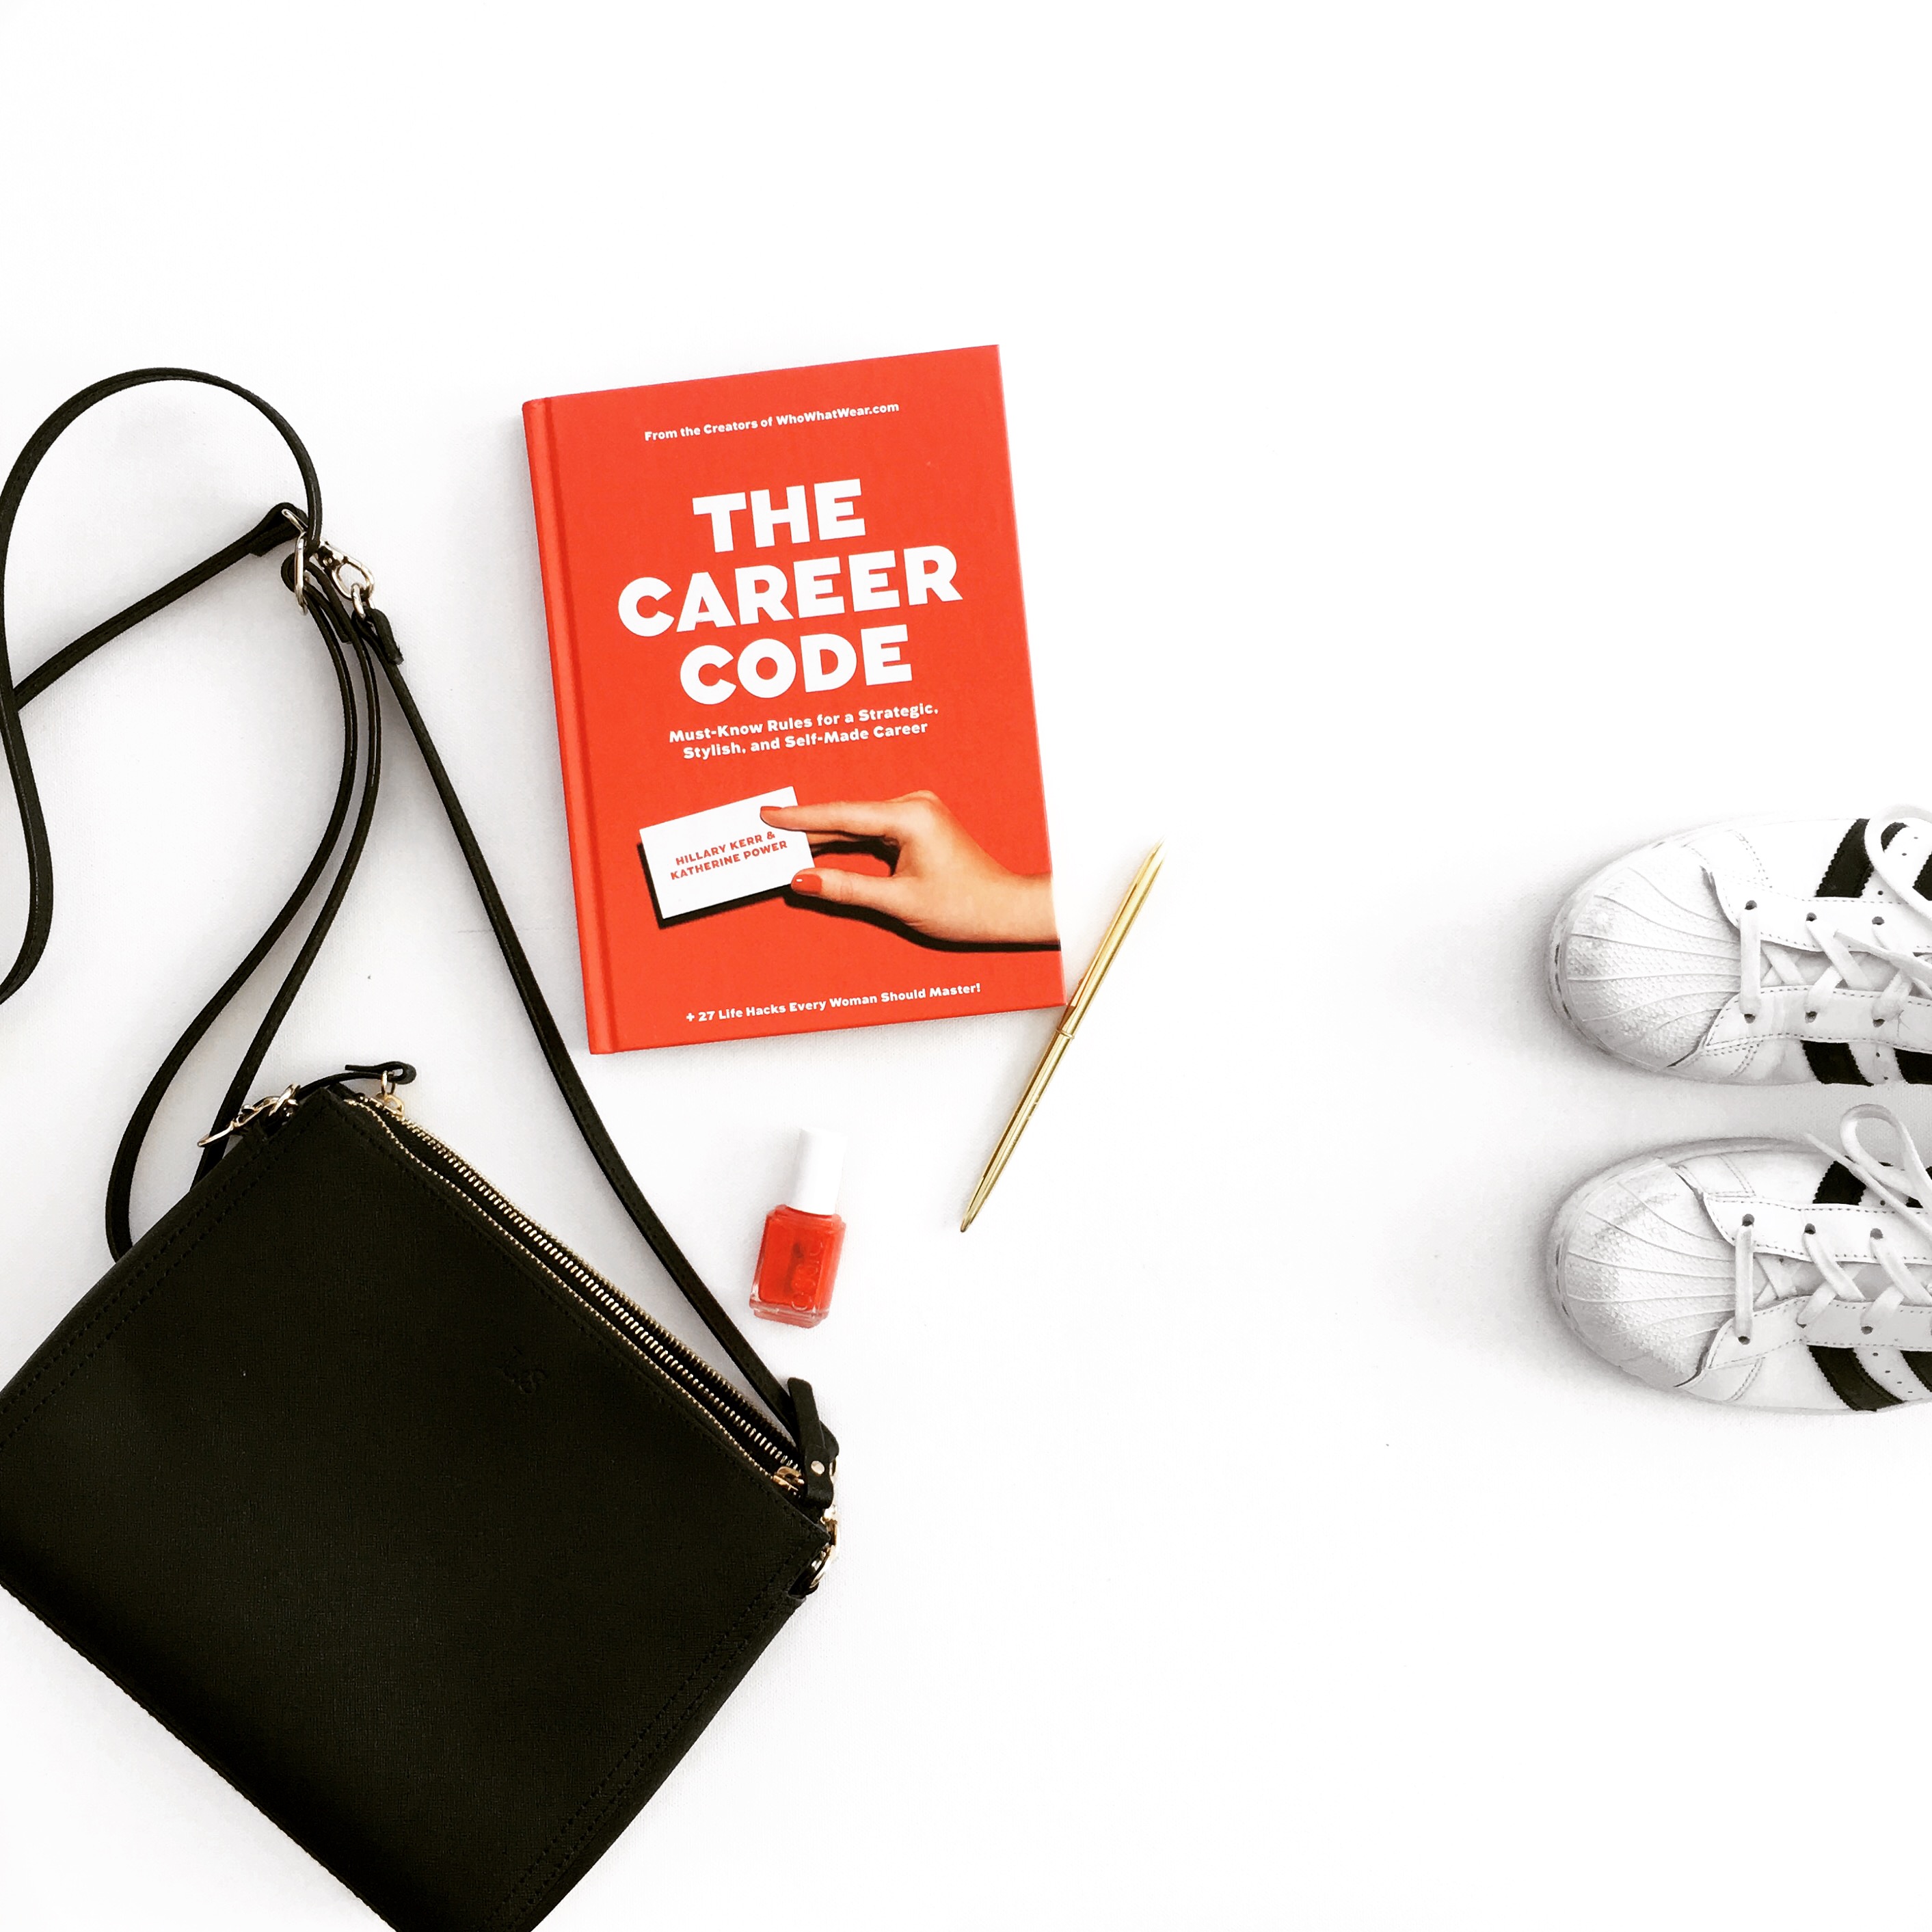 Career Code by the founders of Who What Wear